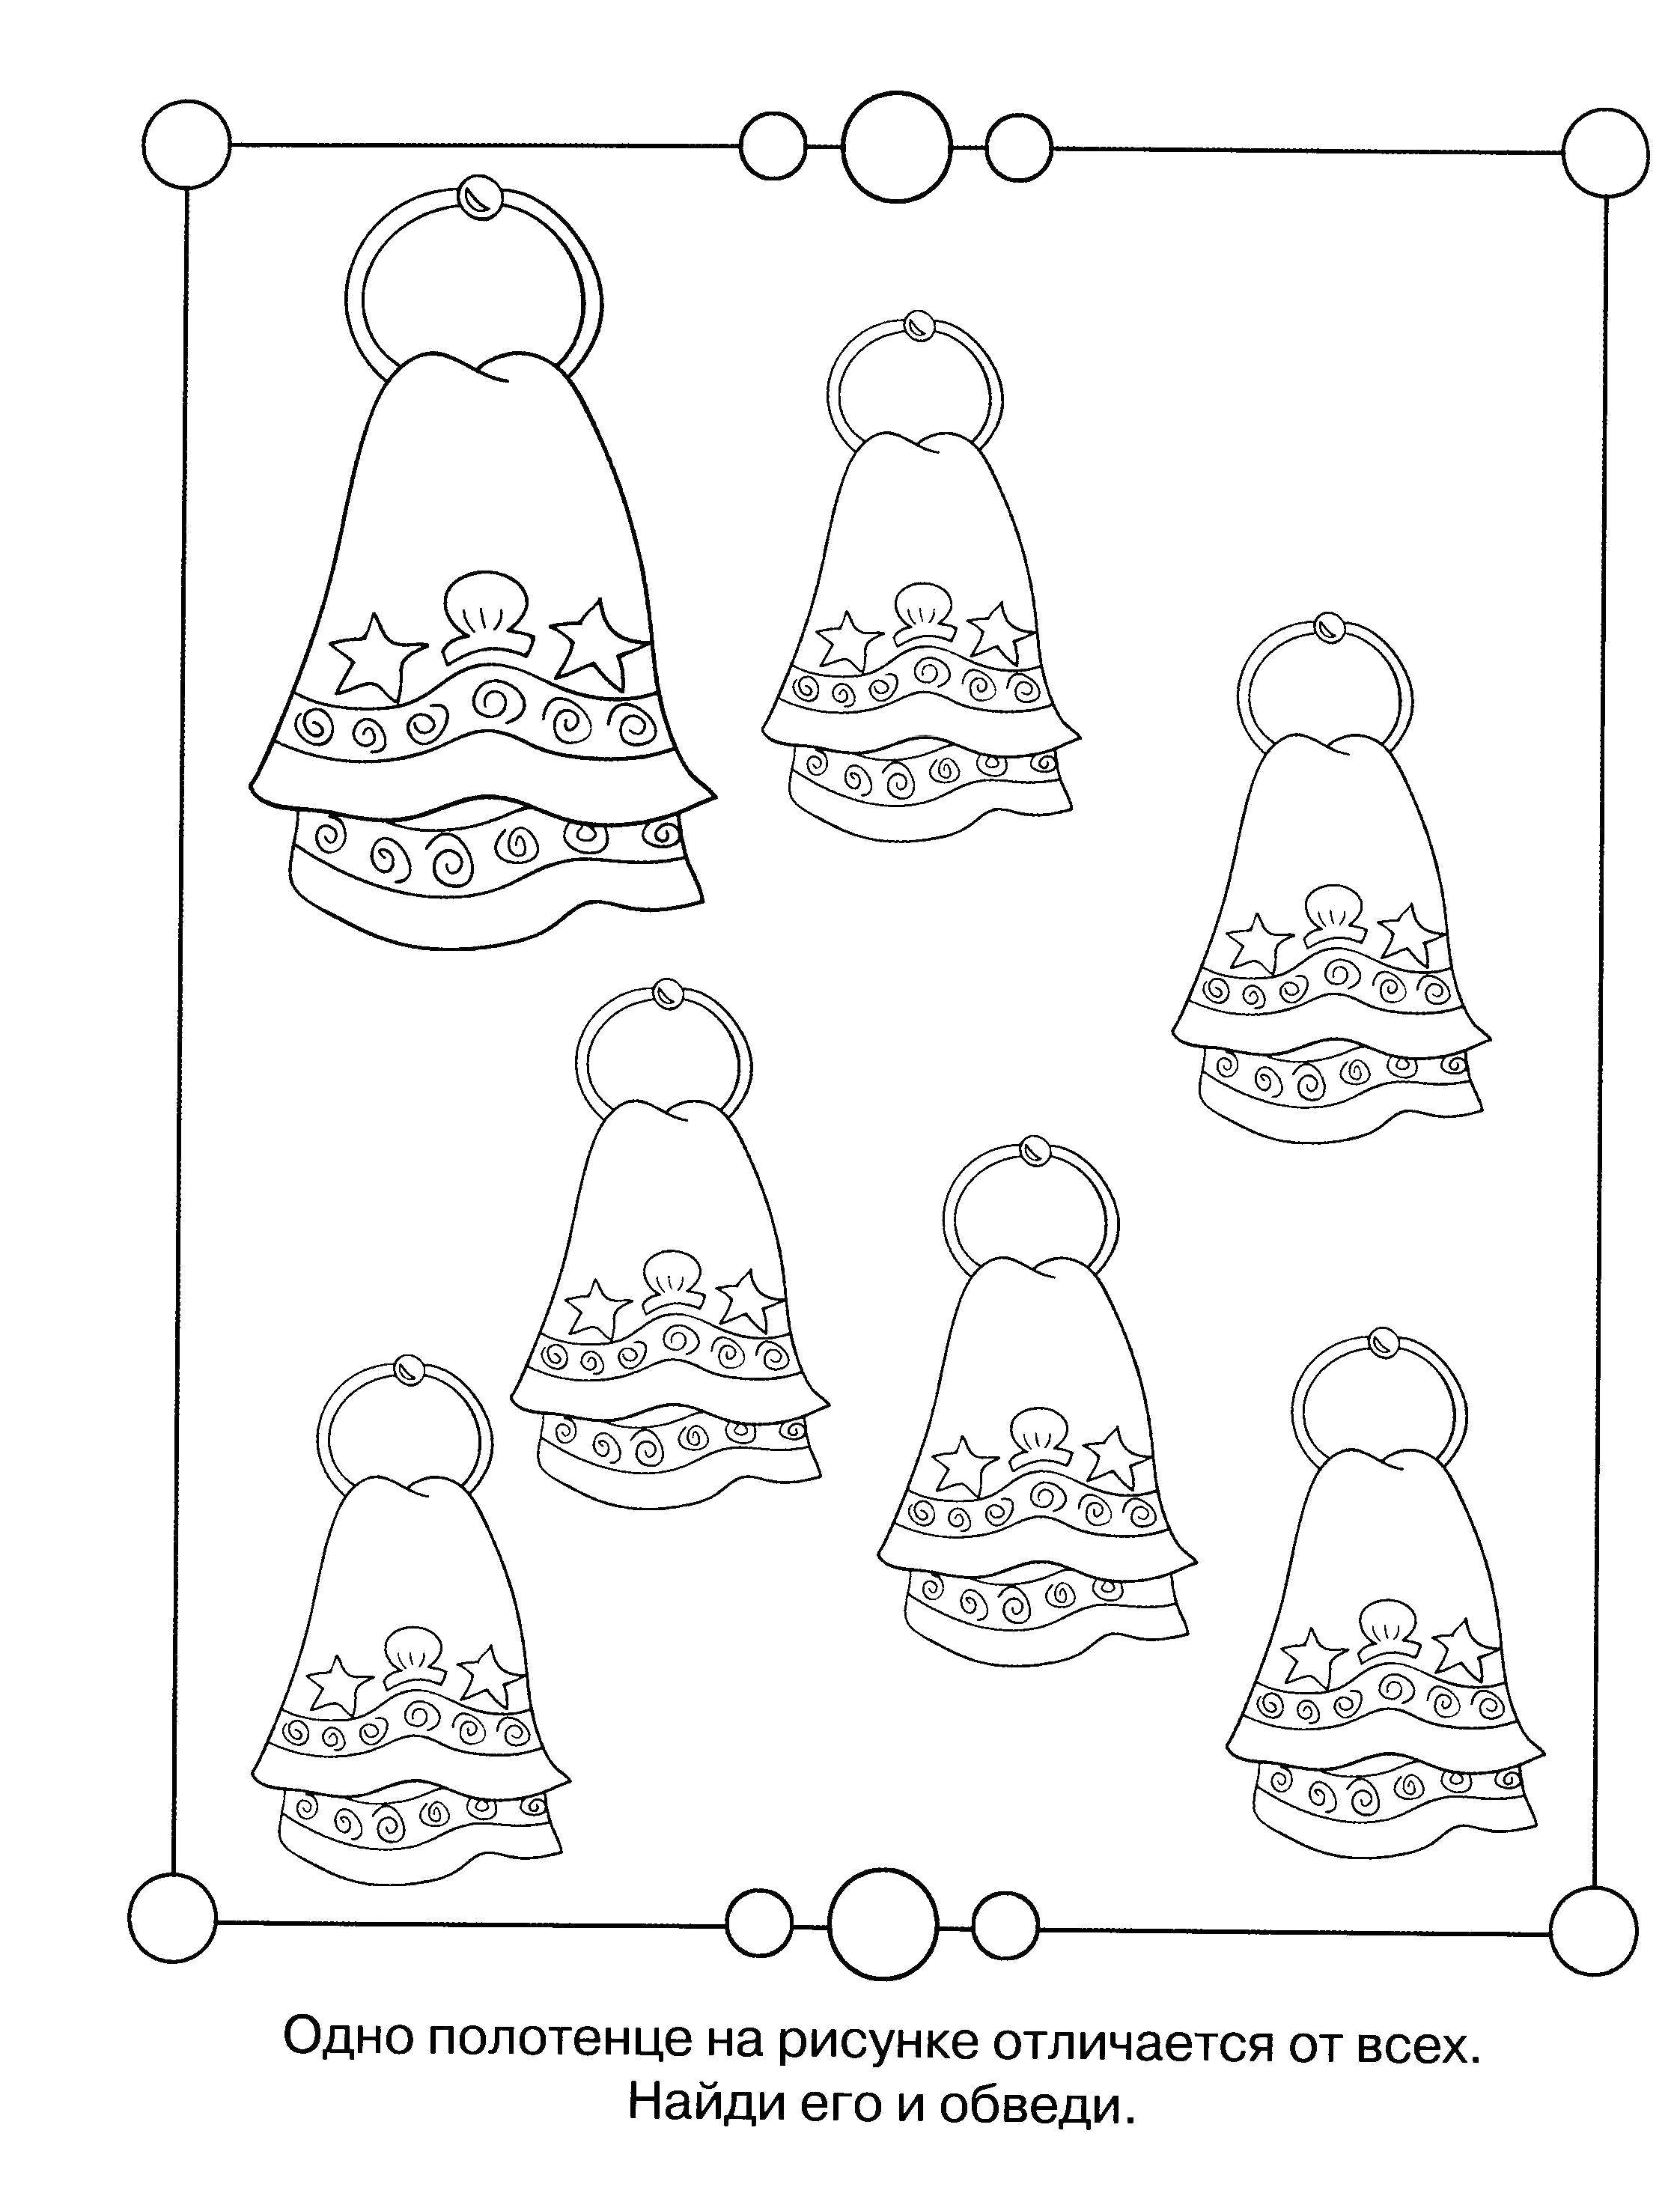 Coloring Extra towel. Category riddles for kids. Tags:  Teaching coloring, logic.